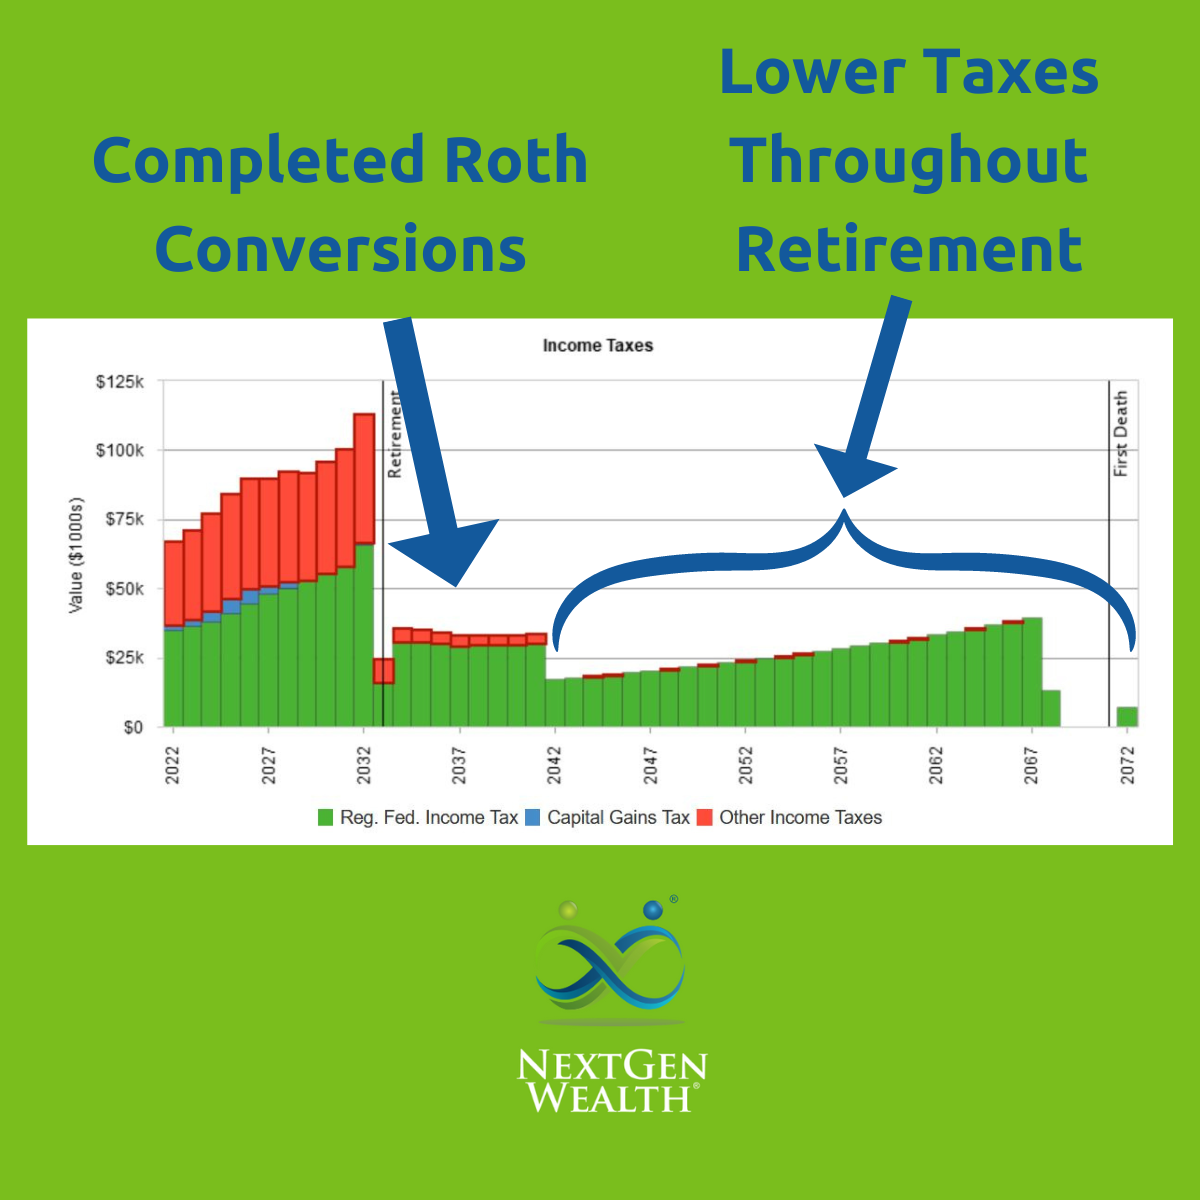 completed roth conversions gap income taxes in retirement